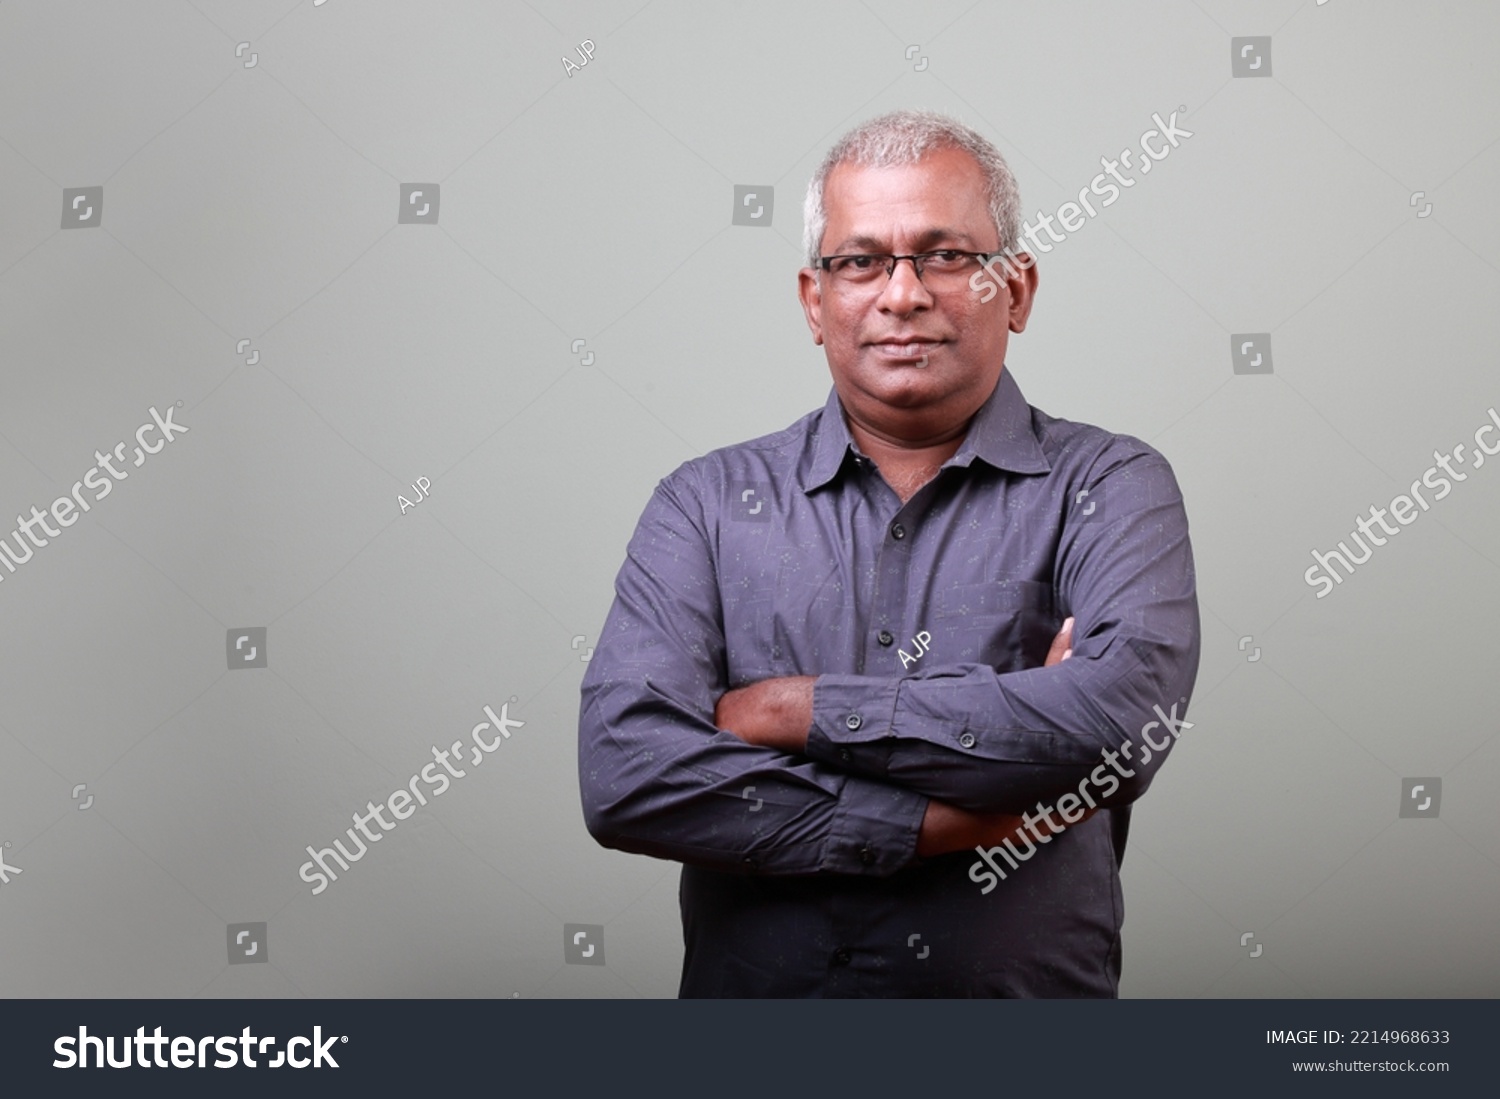 Portrait of a senior man of Indian ethnicity a smiling face #2214968633